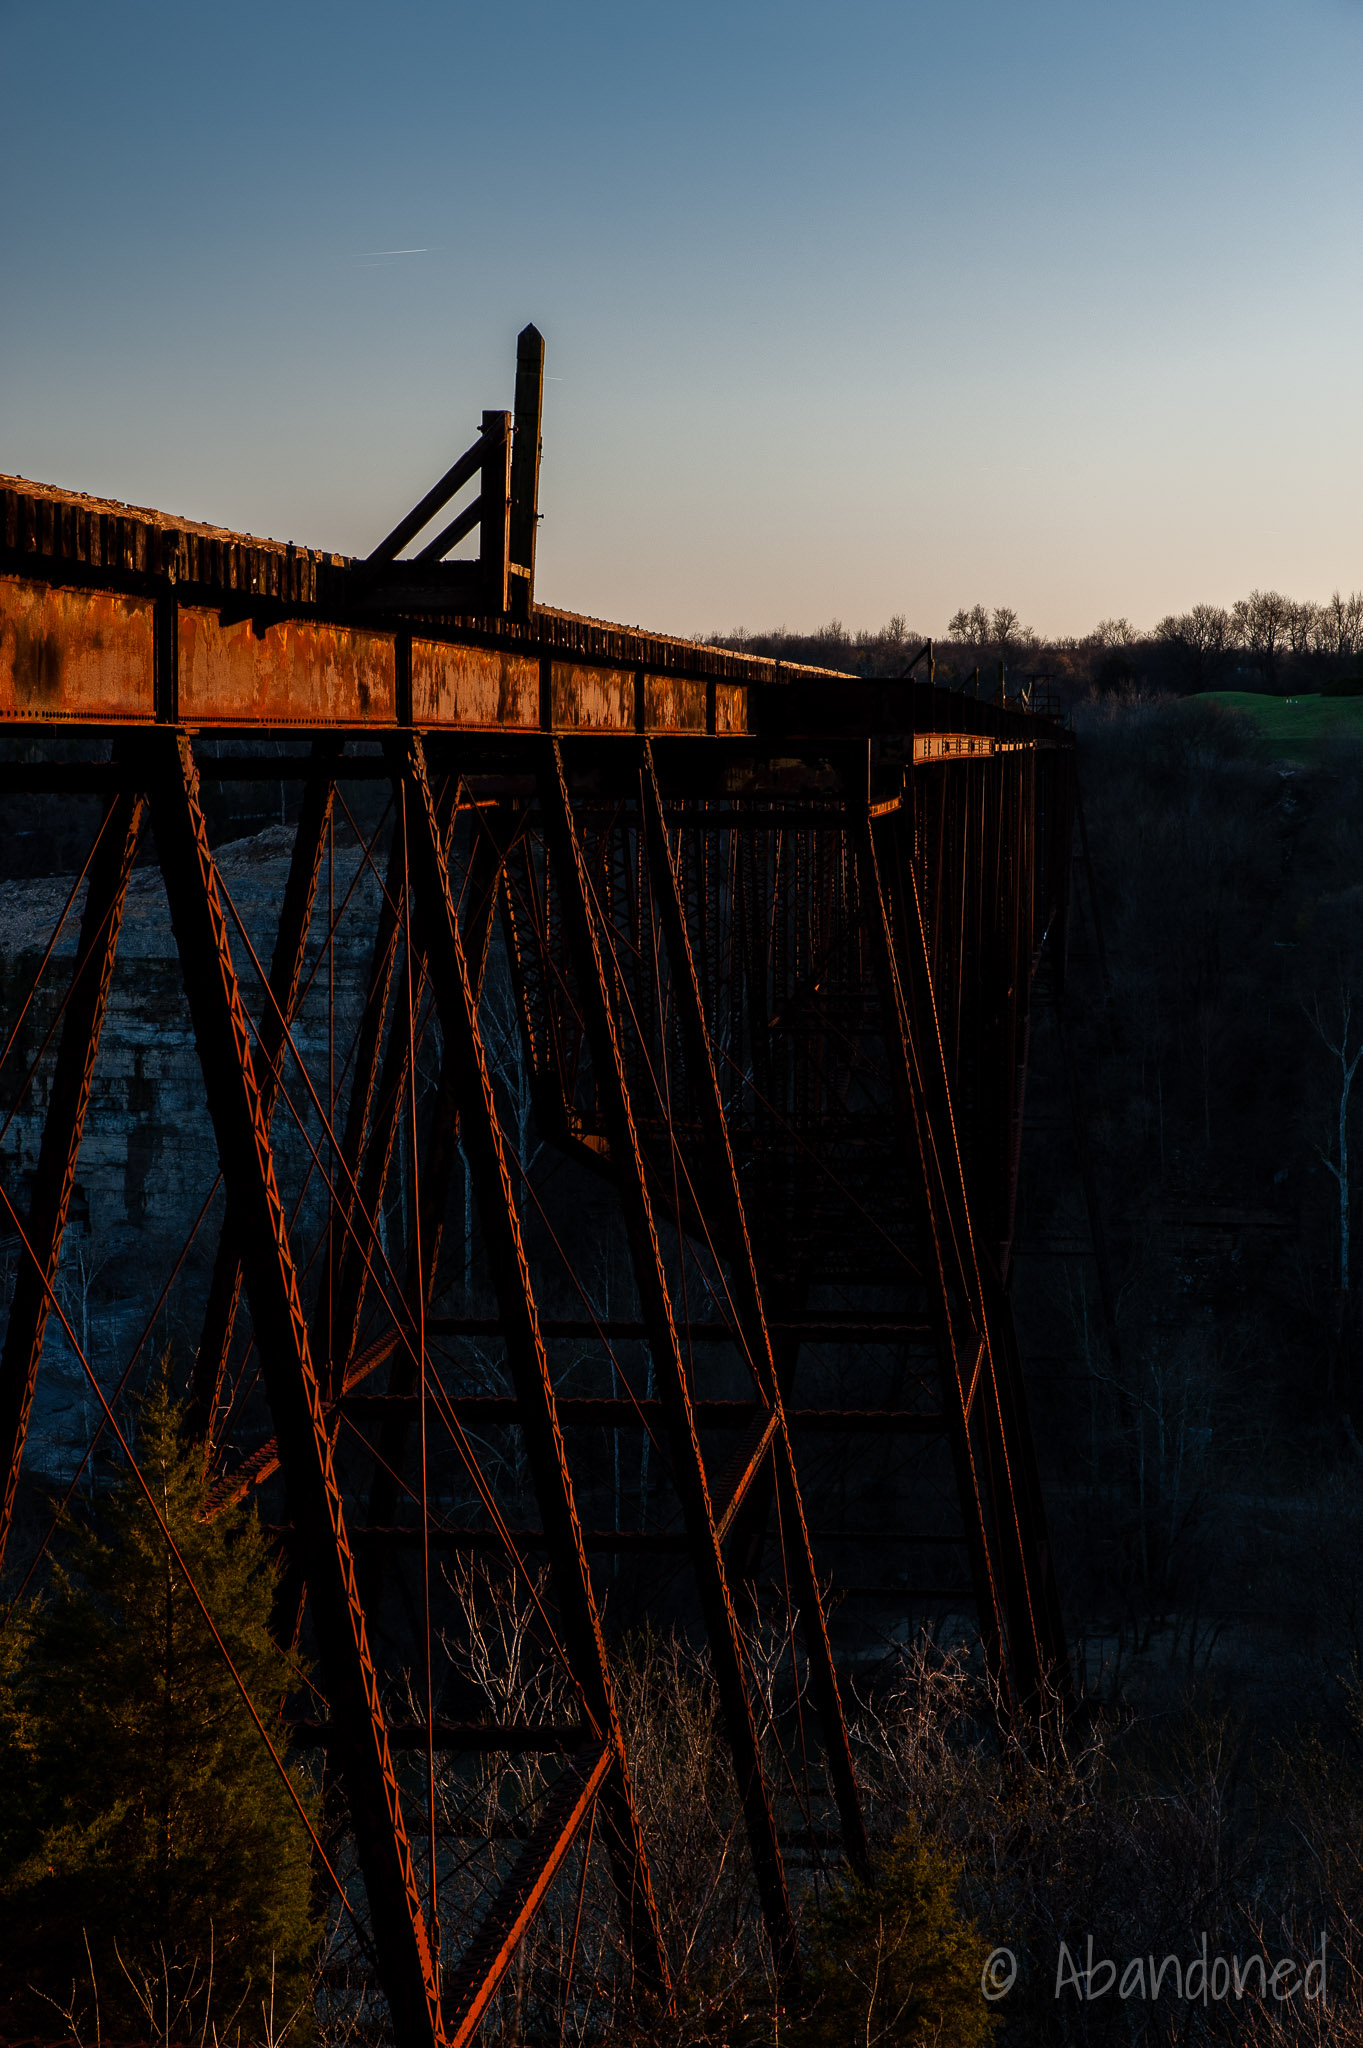 Young’s High Bridge, Louisville & Southern Railway Lexington to Lawrenceburg Division